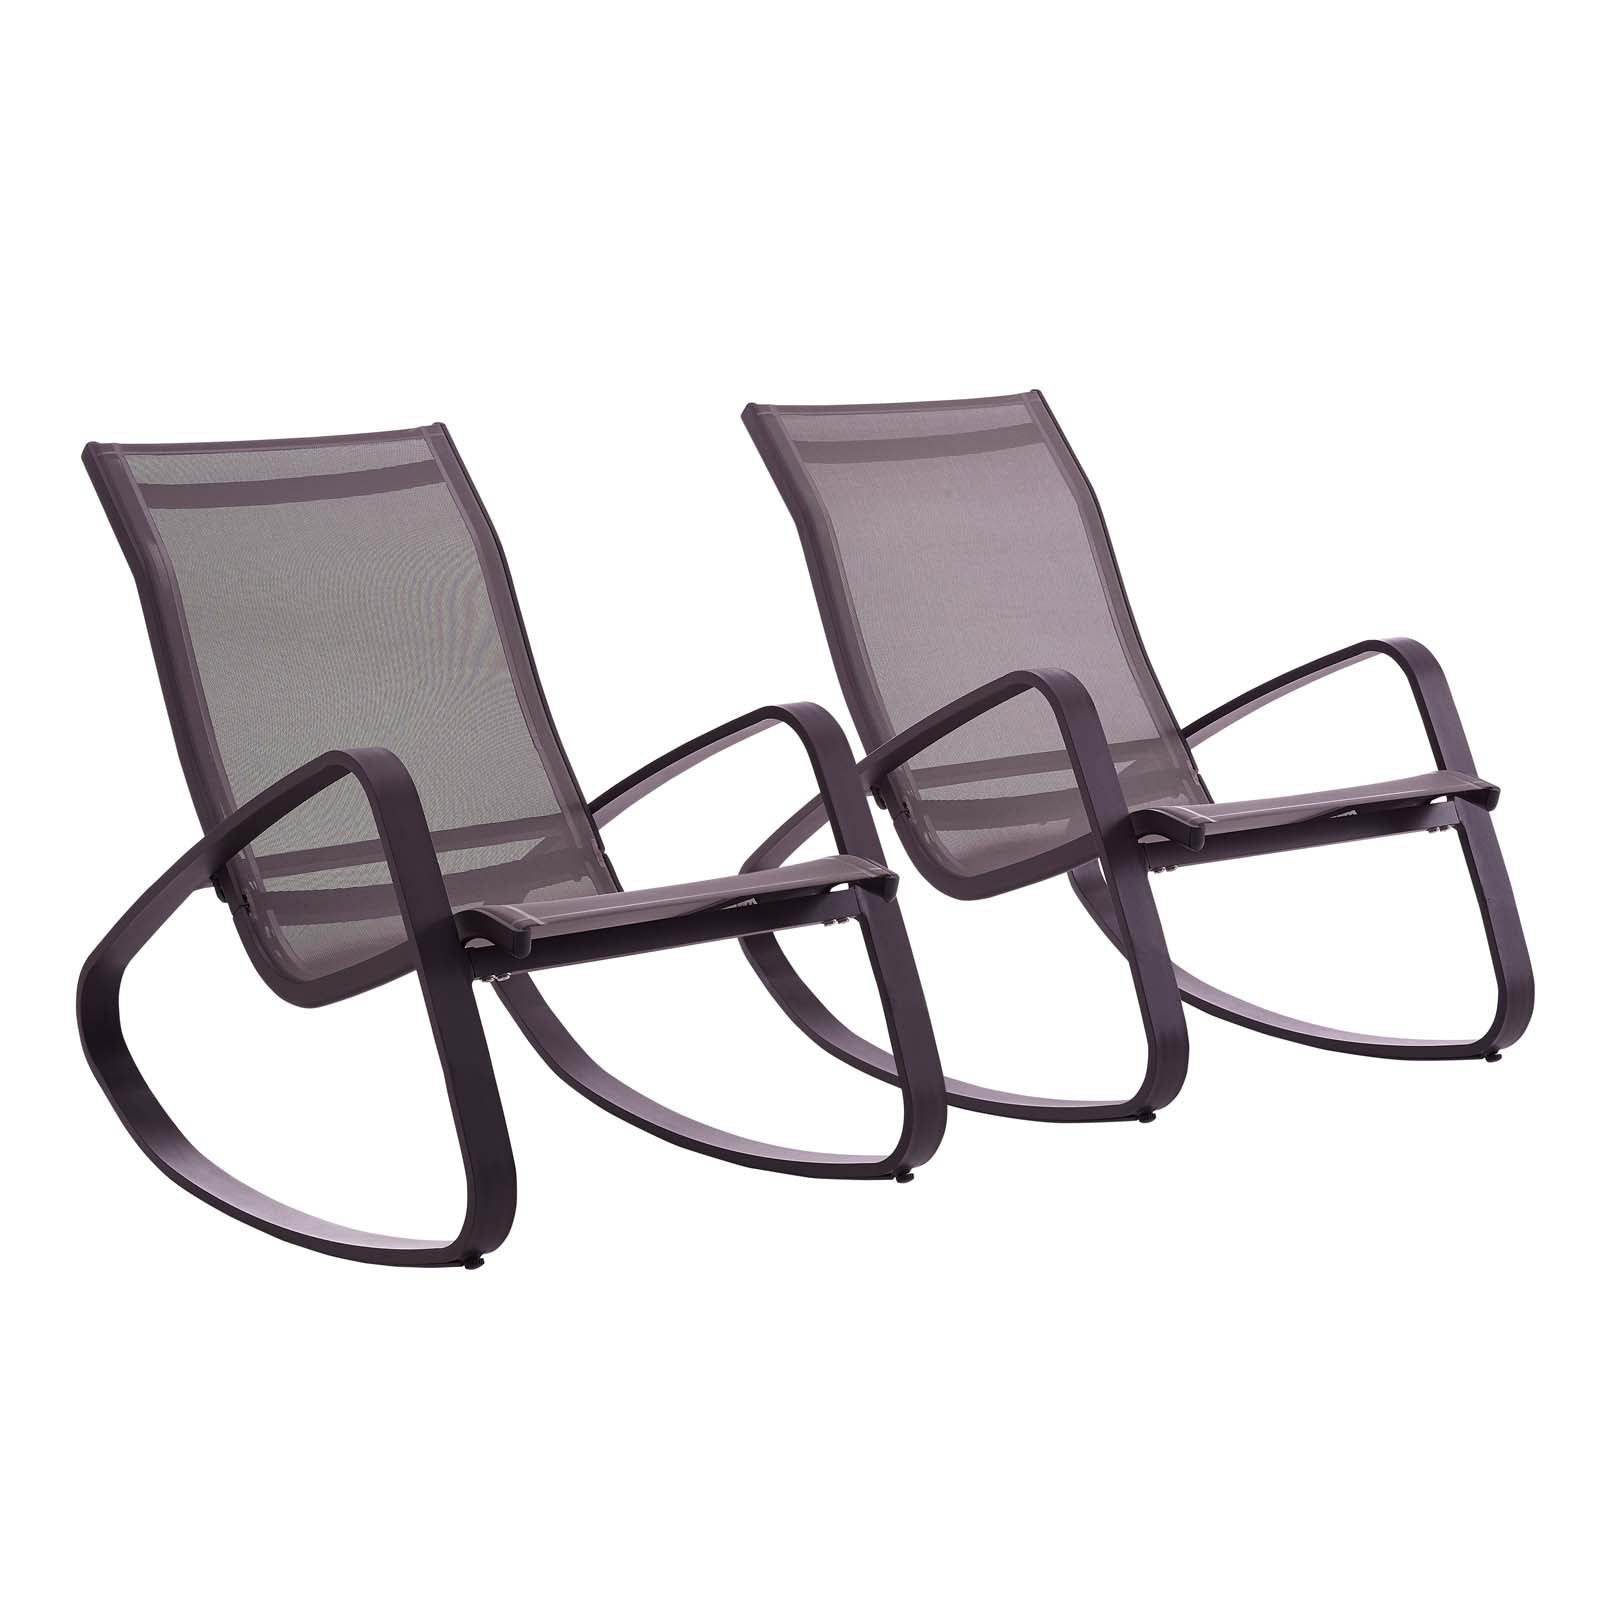 Modway Outdoor Chairs - Traveler Rocking Lounge Chair Outdoor Patio Black (Set Of 2)